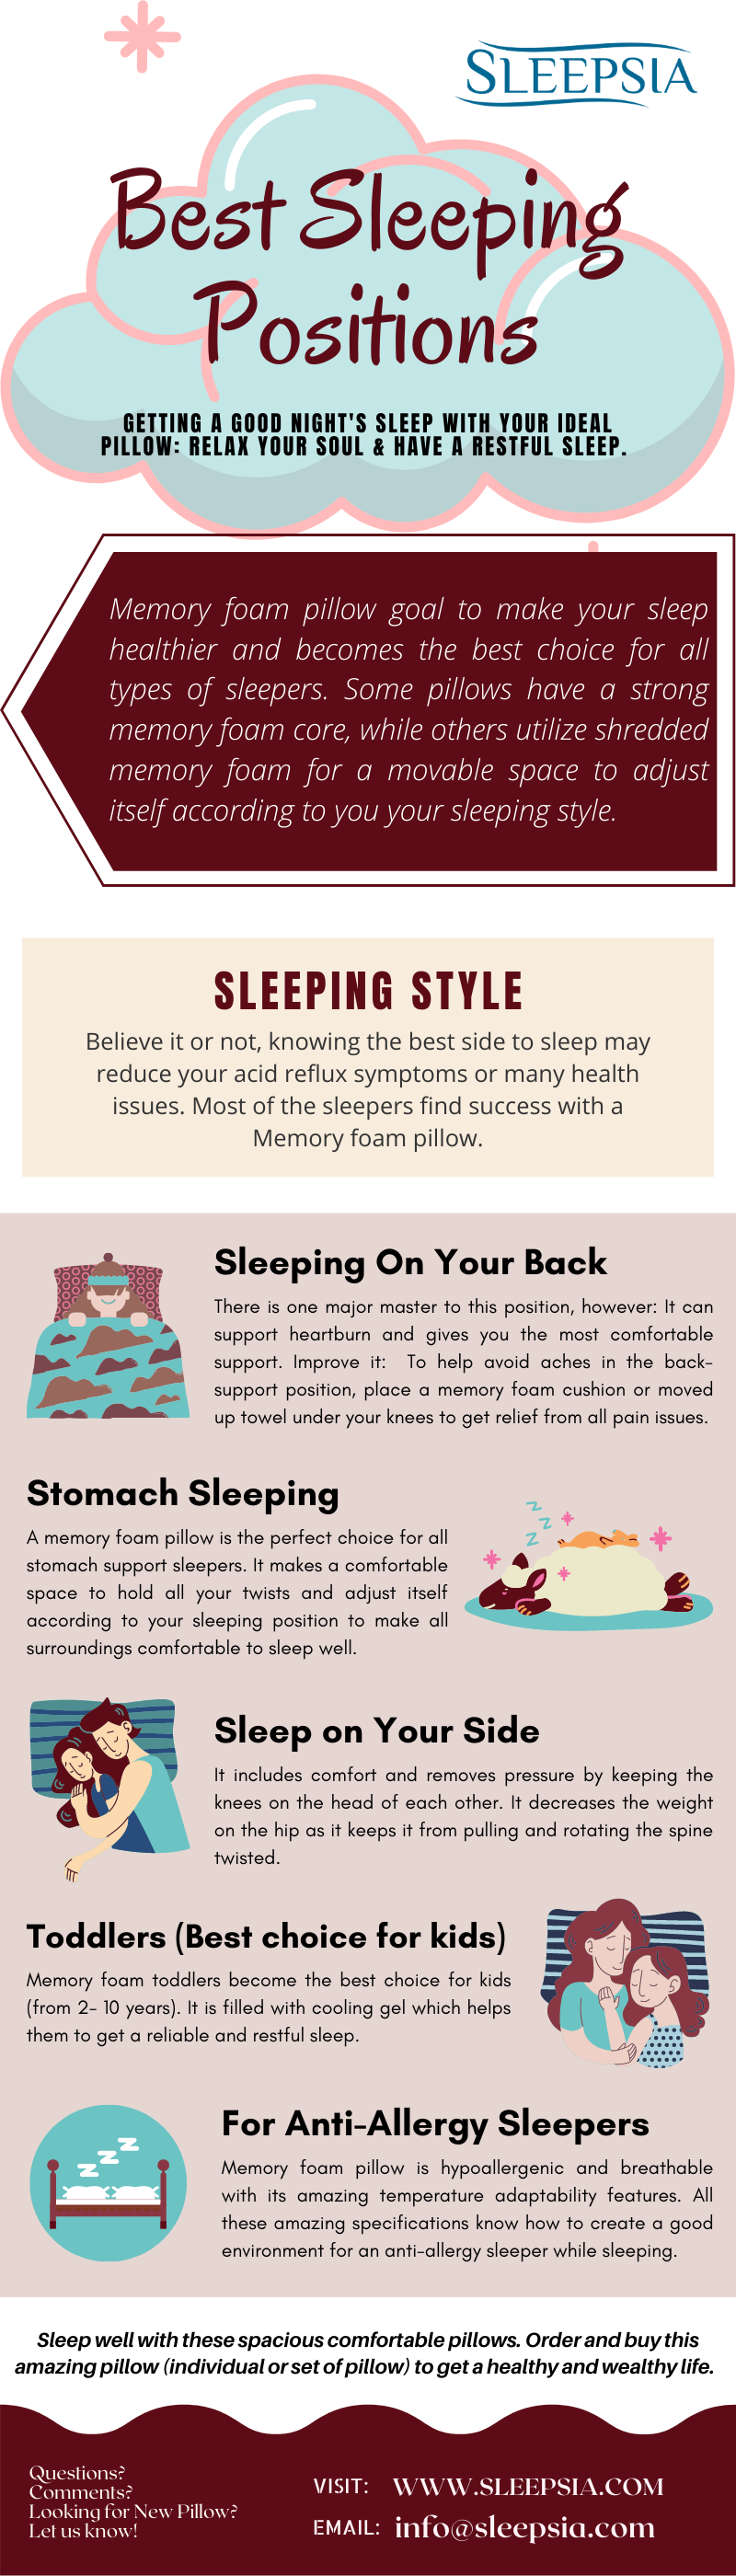 Get Proper Spinal Alignment While Sleeping With These Recommendations SF